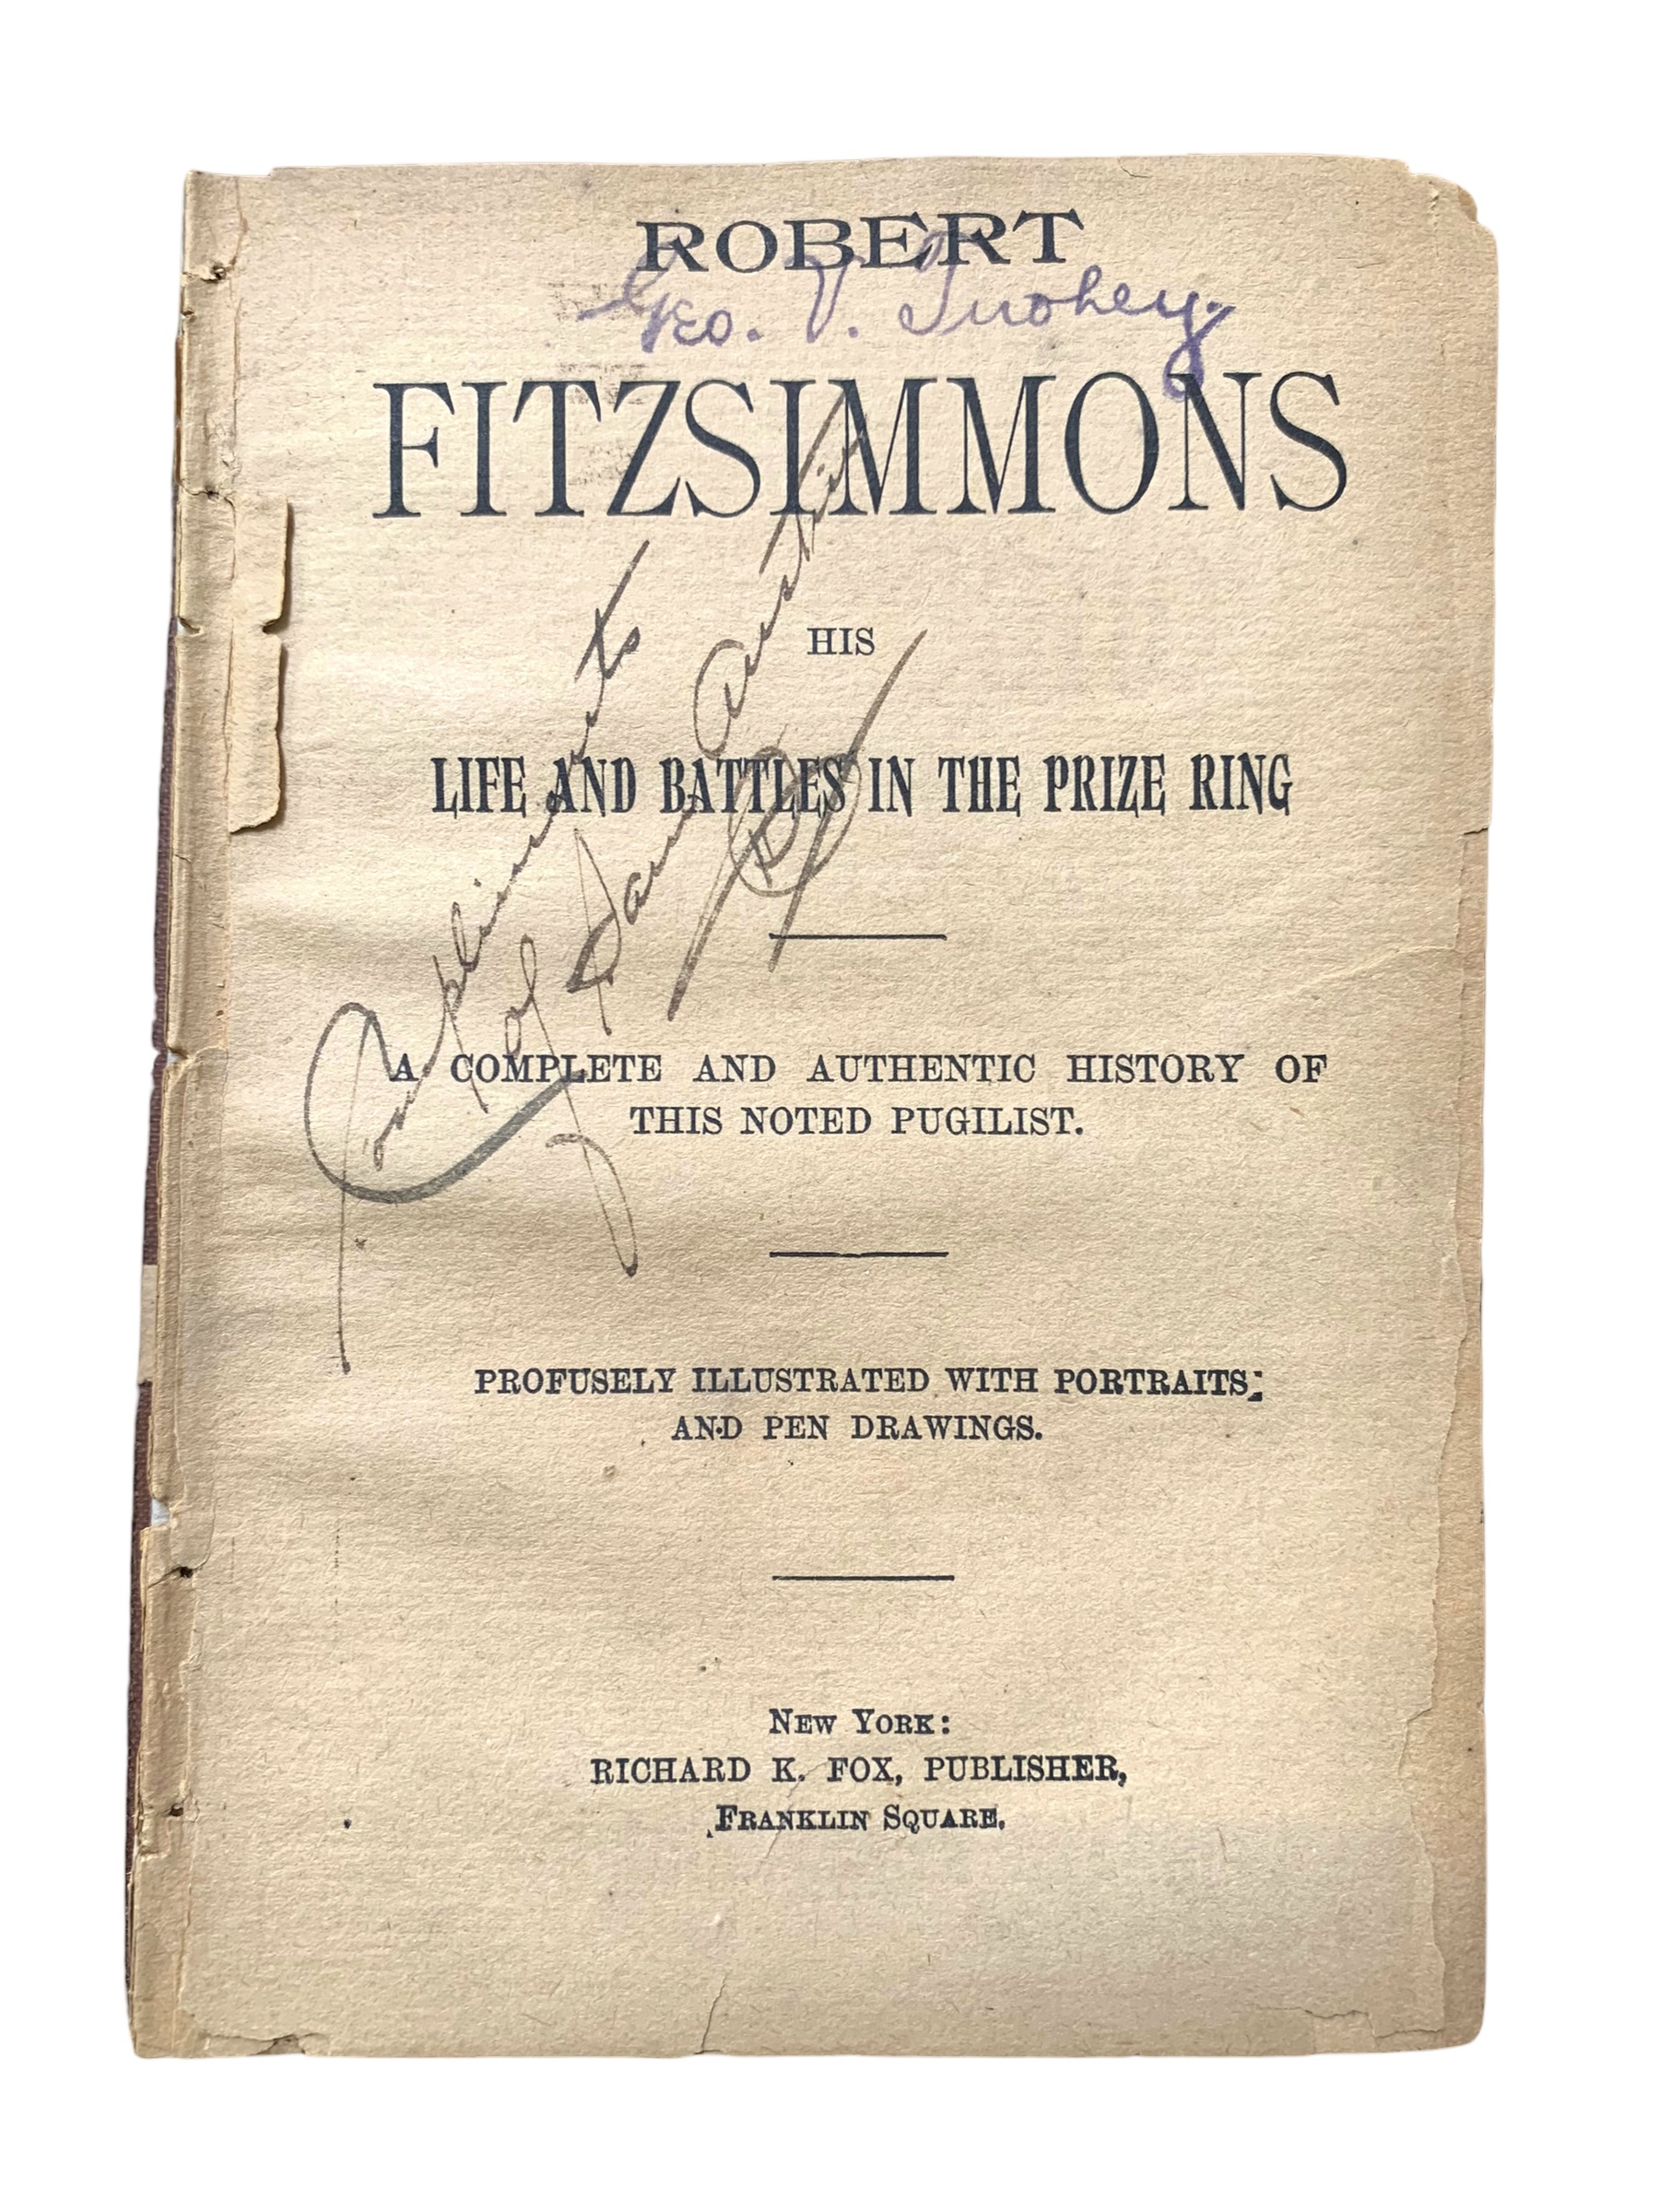 Fitzsimmons. His Life and Battles in the Prize Ring…, NY 1897